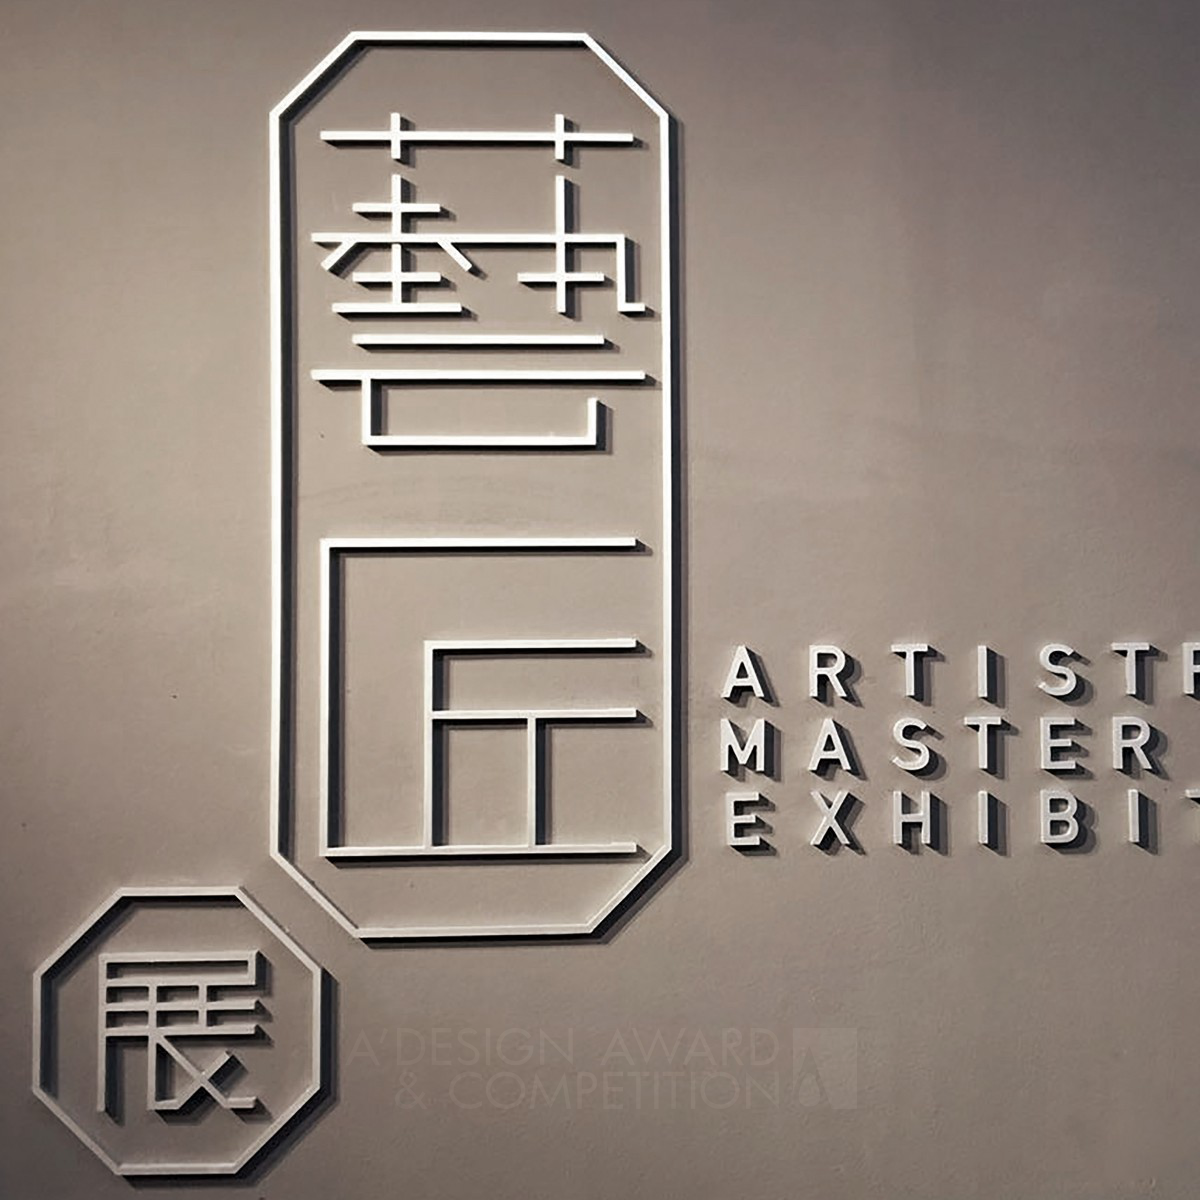 Artistry Master Exhibition Exhibition Visual by Yongan Zhou